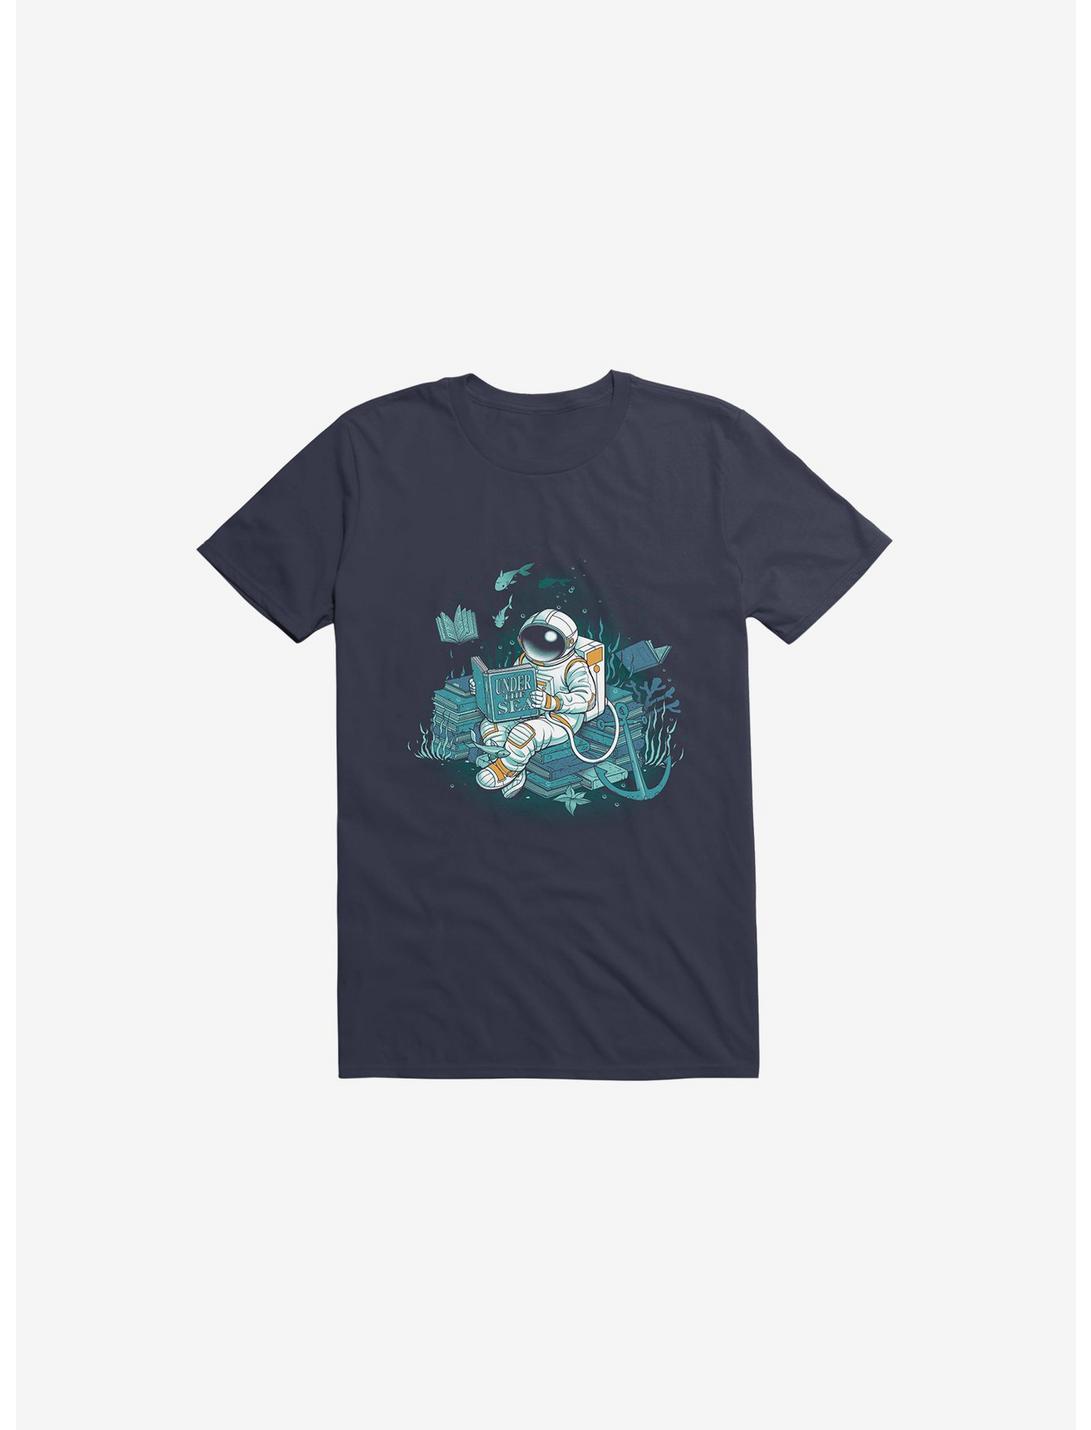 A Reader Lives A Thousand Lives: Cosmonaut Under The Sea T-Shirt, NAVY, hi-res